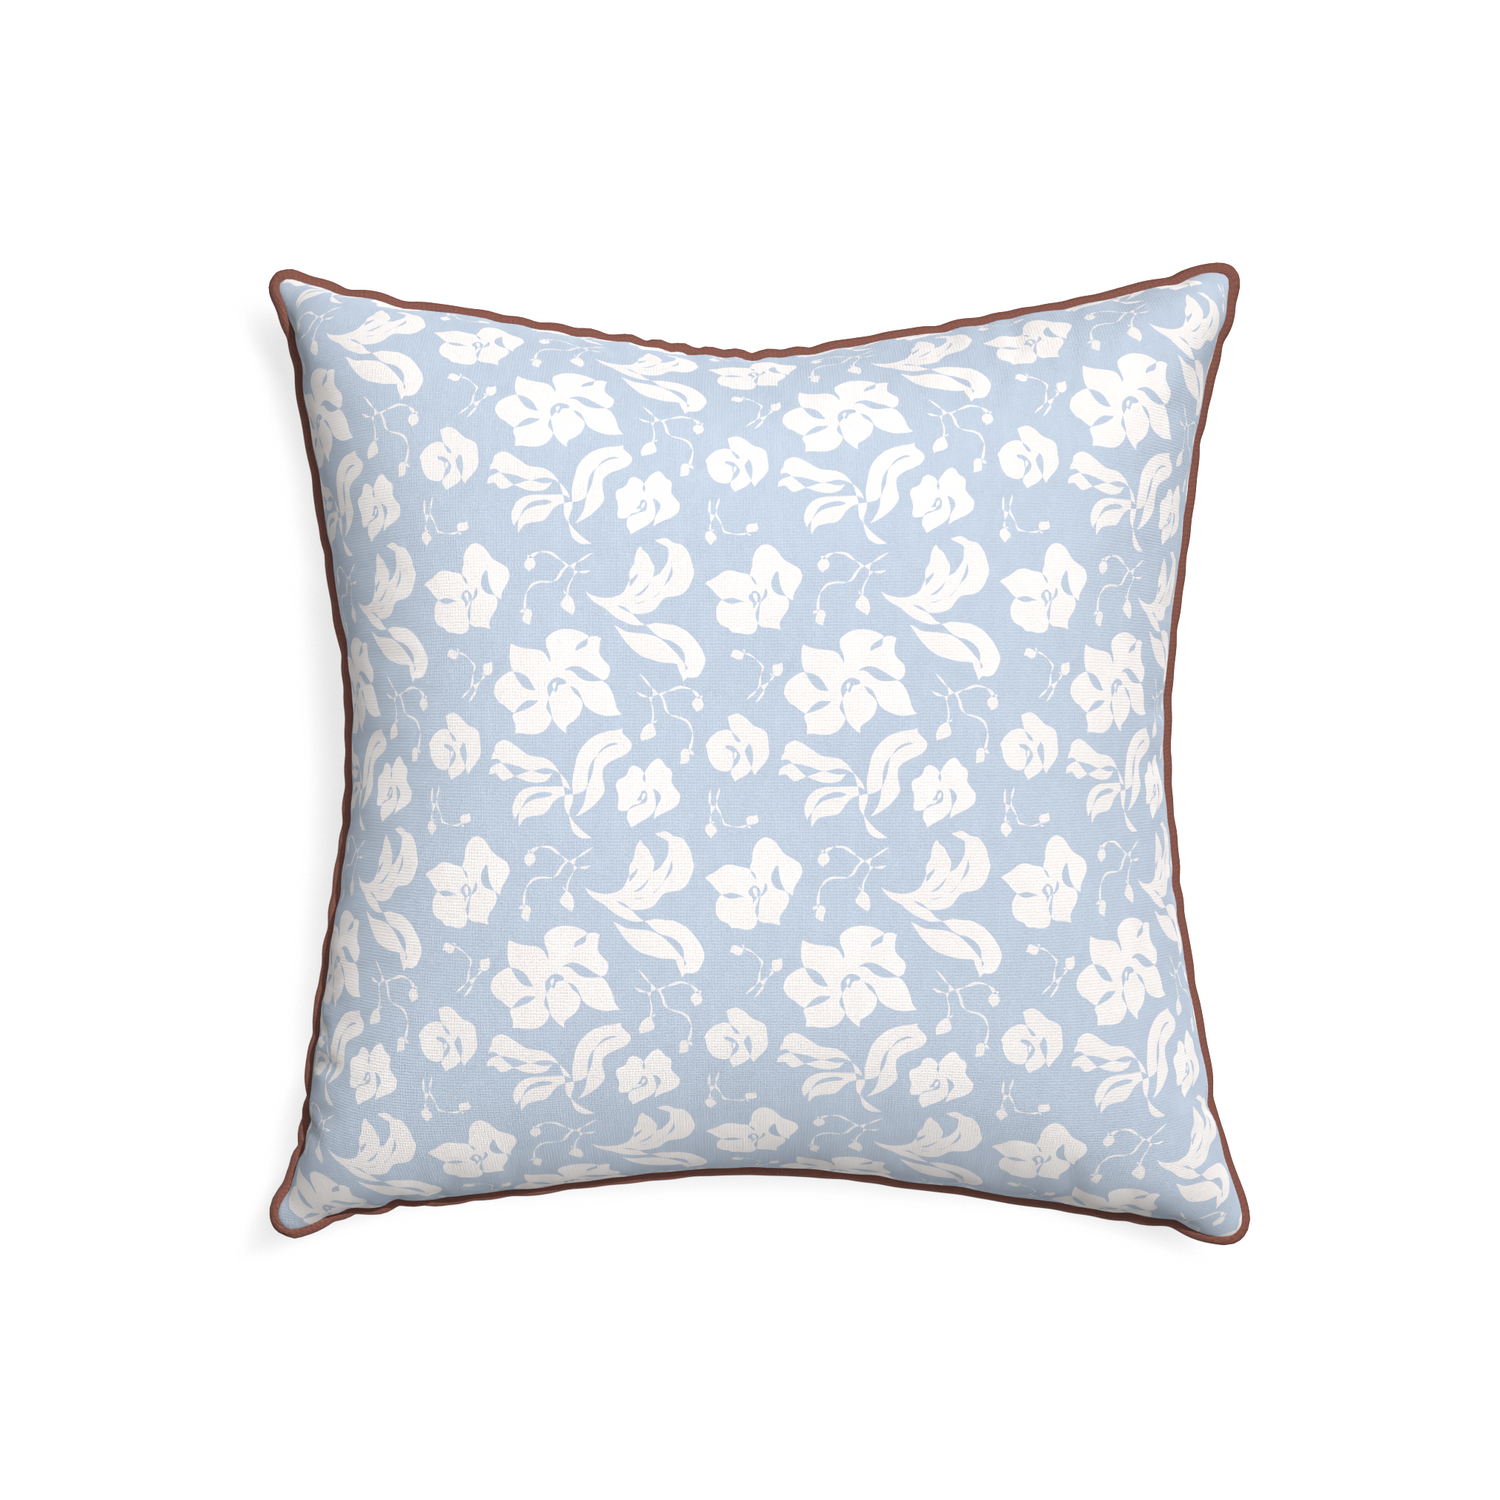 22-square georgia custom pillow with w piping on white background